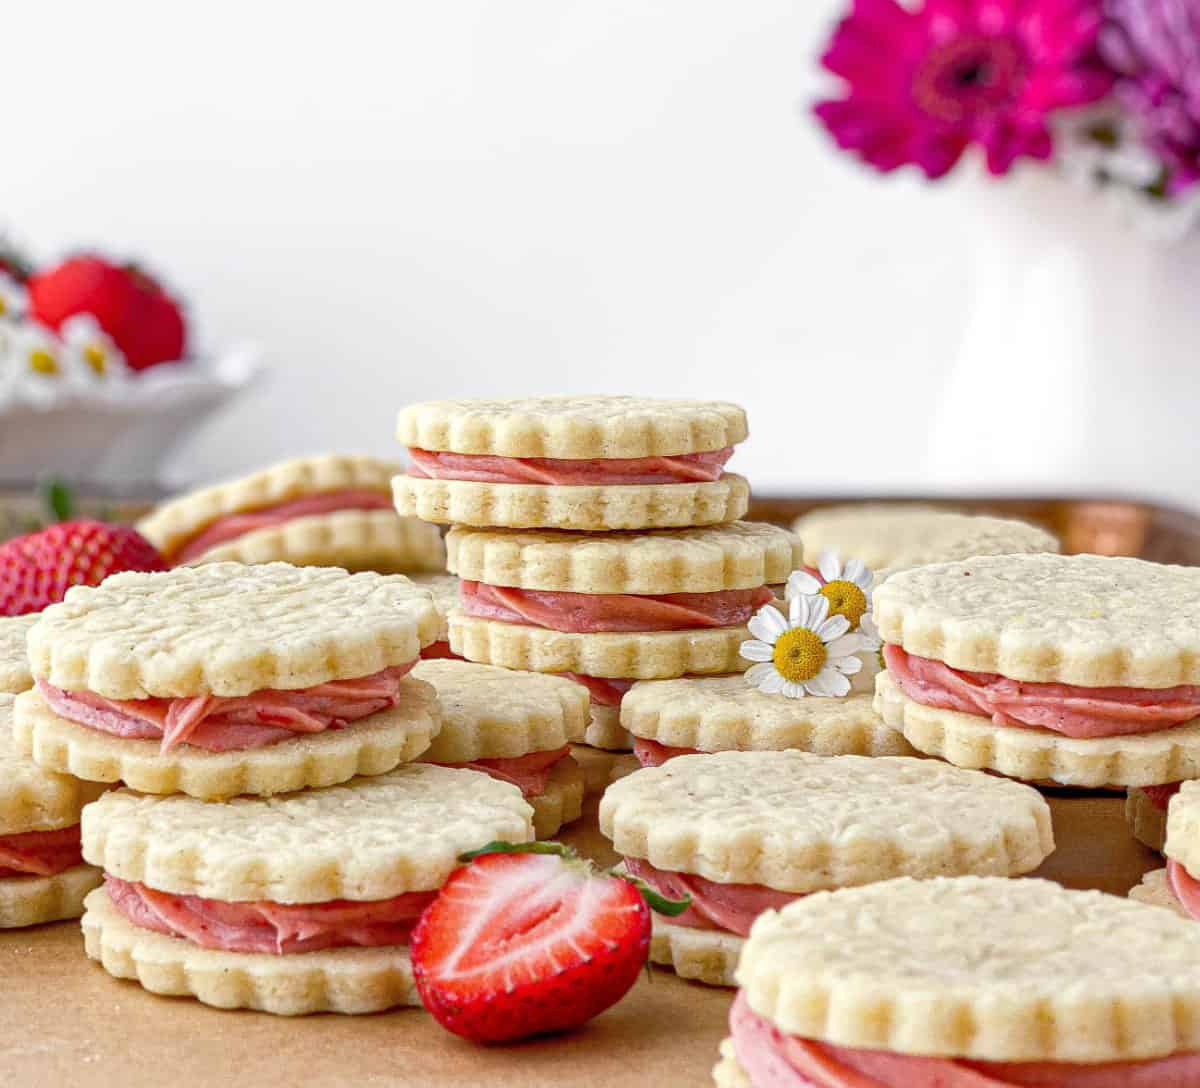 Strawberry Cheesecake Cookies stacked on a baking sheet with strawberries and small white flowers nearby.